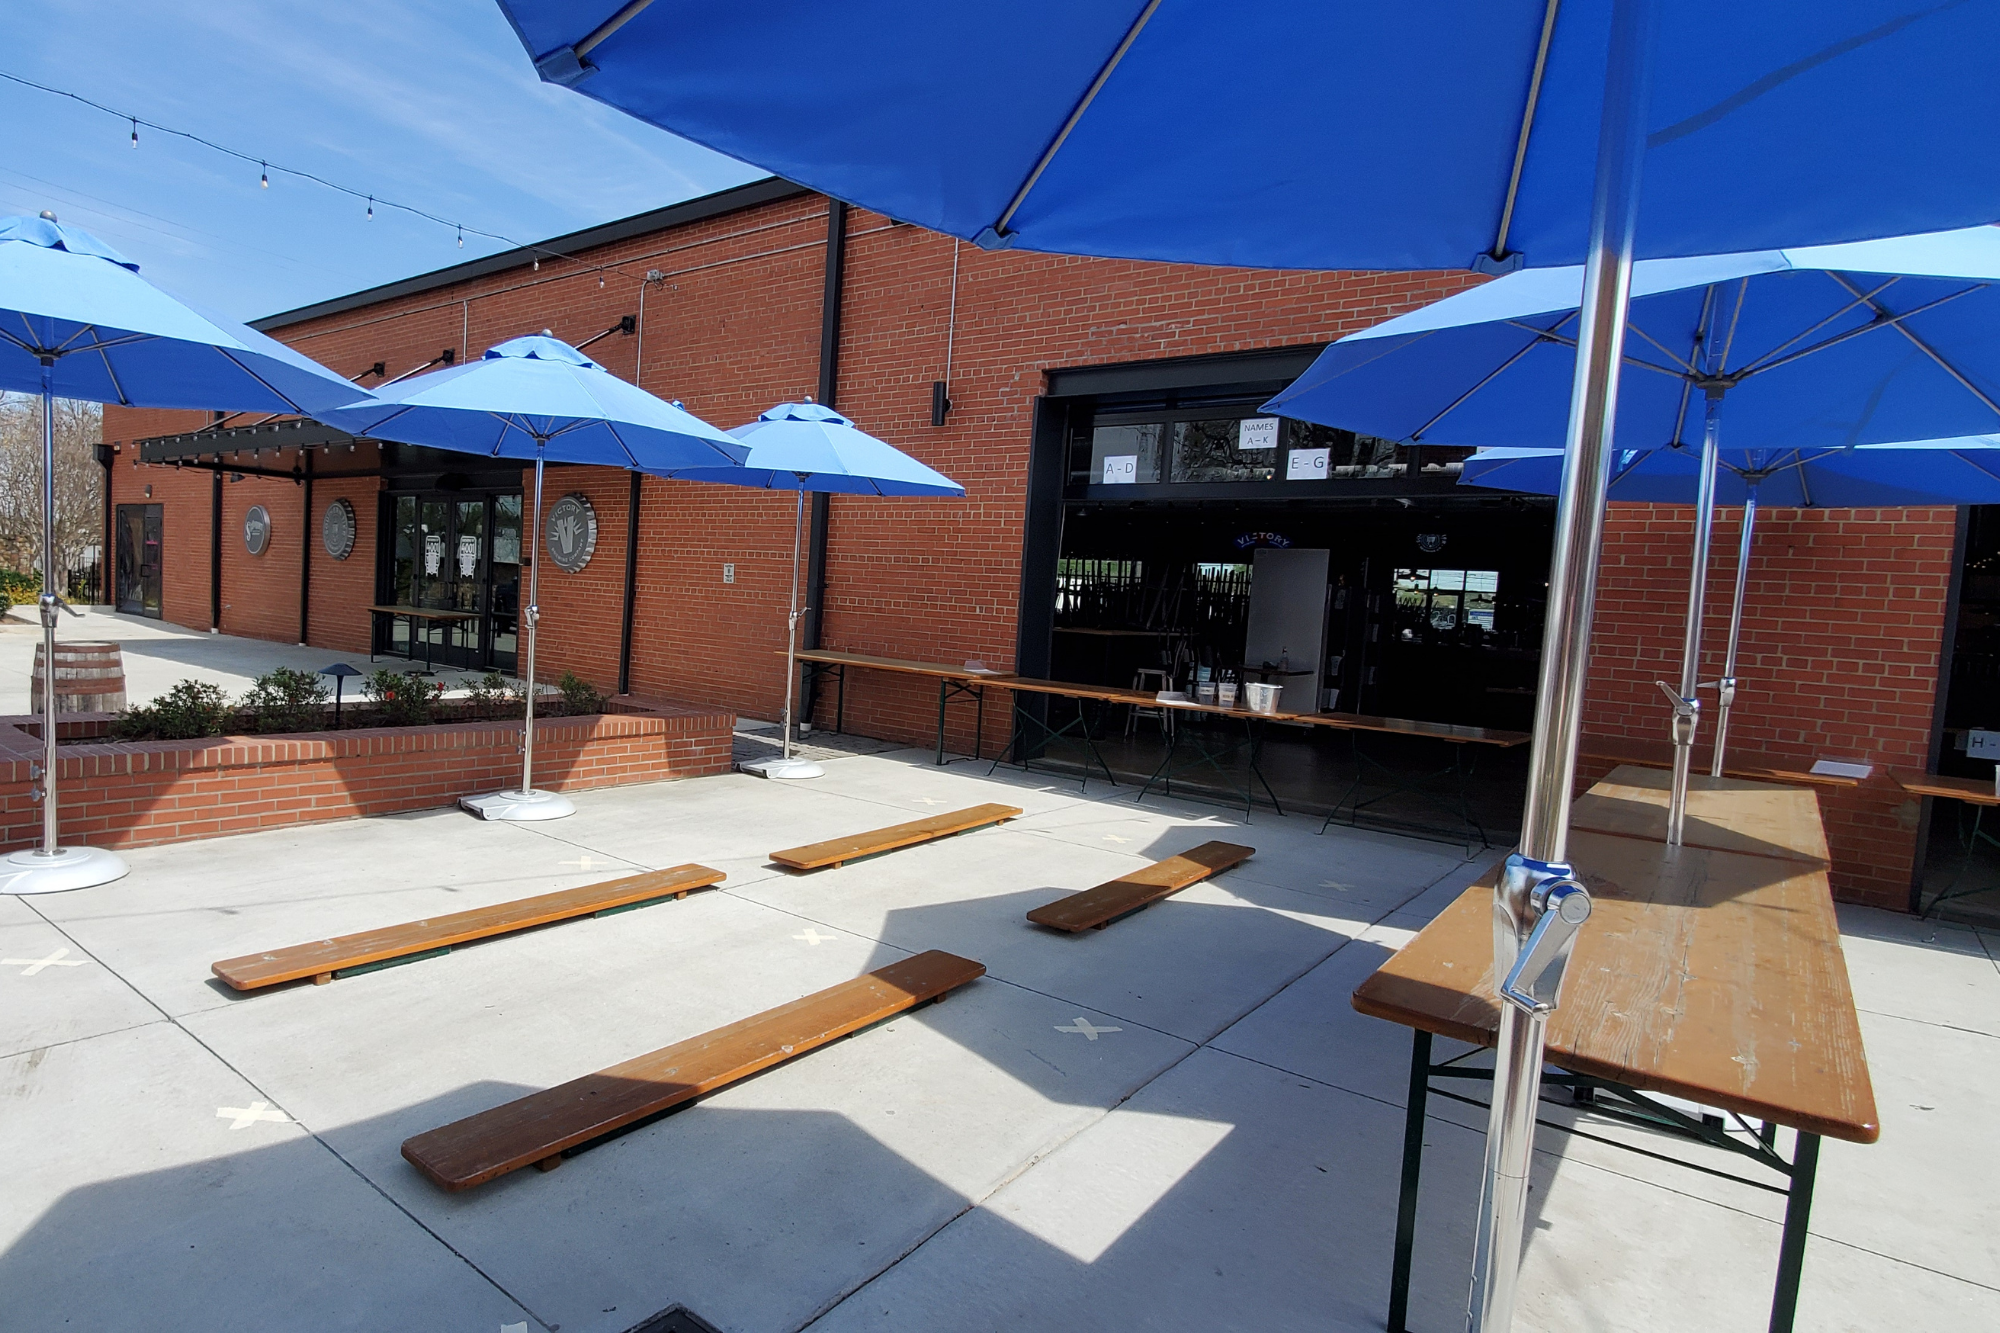 Exterior of a brick building with tables and umbrellas in front